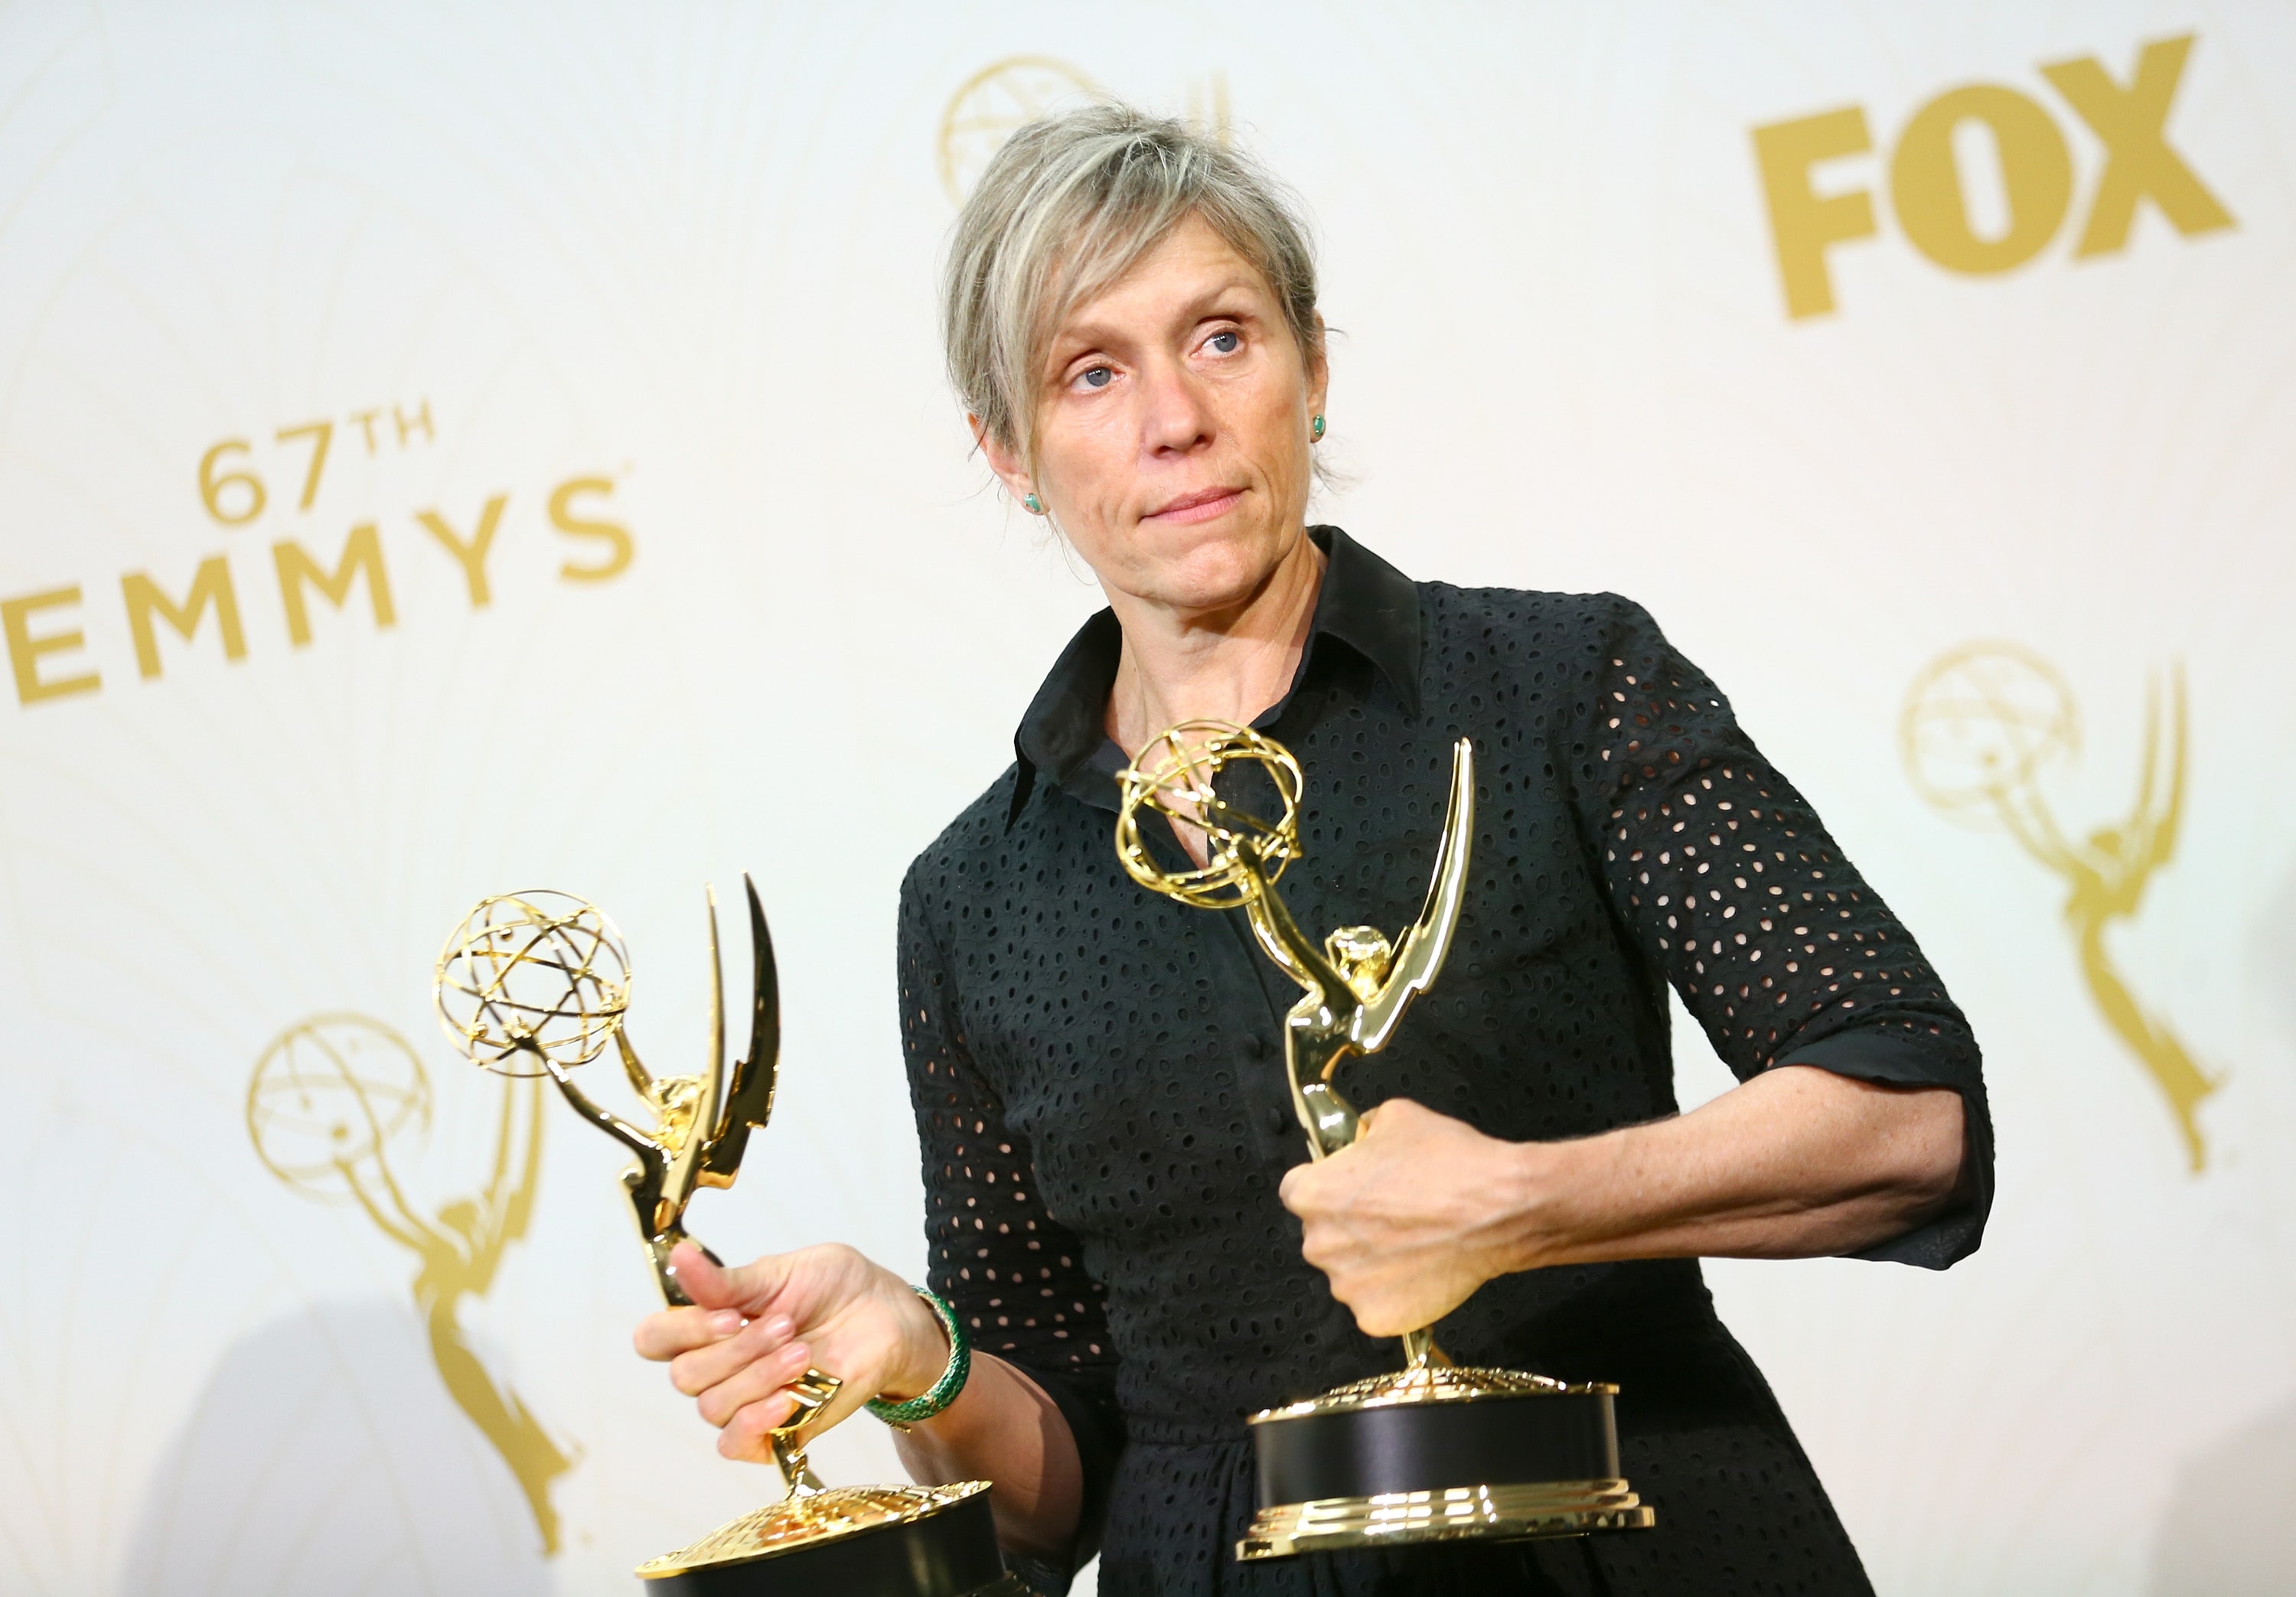 Frances McDormand wearing black dress and holding trophies with her both hands